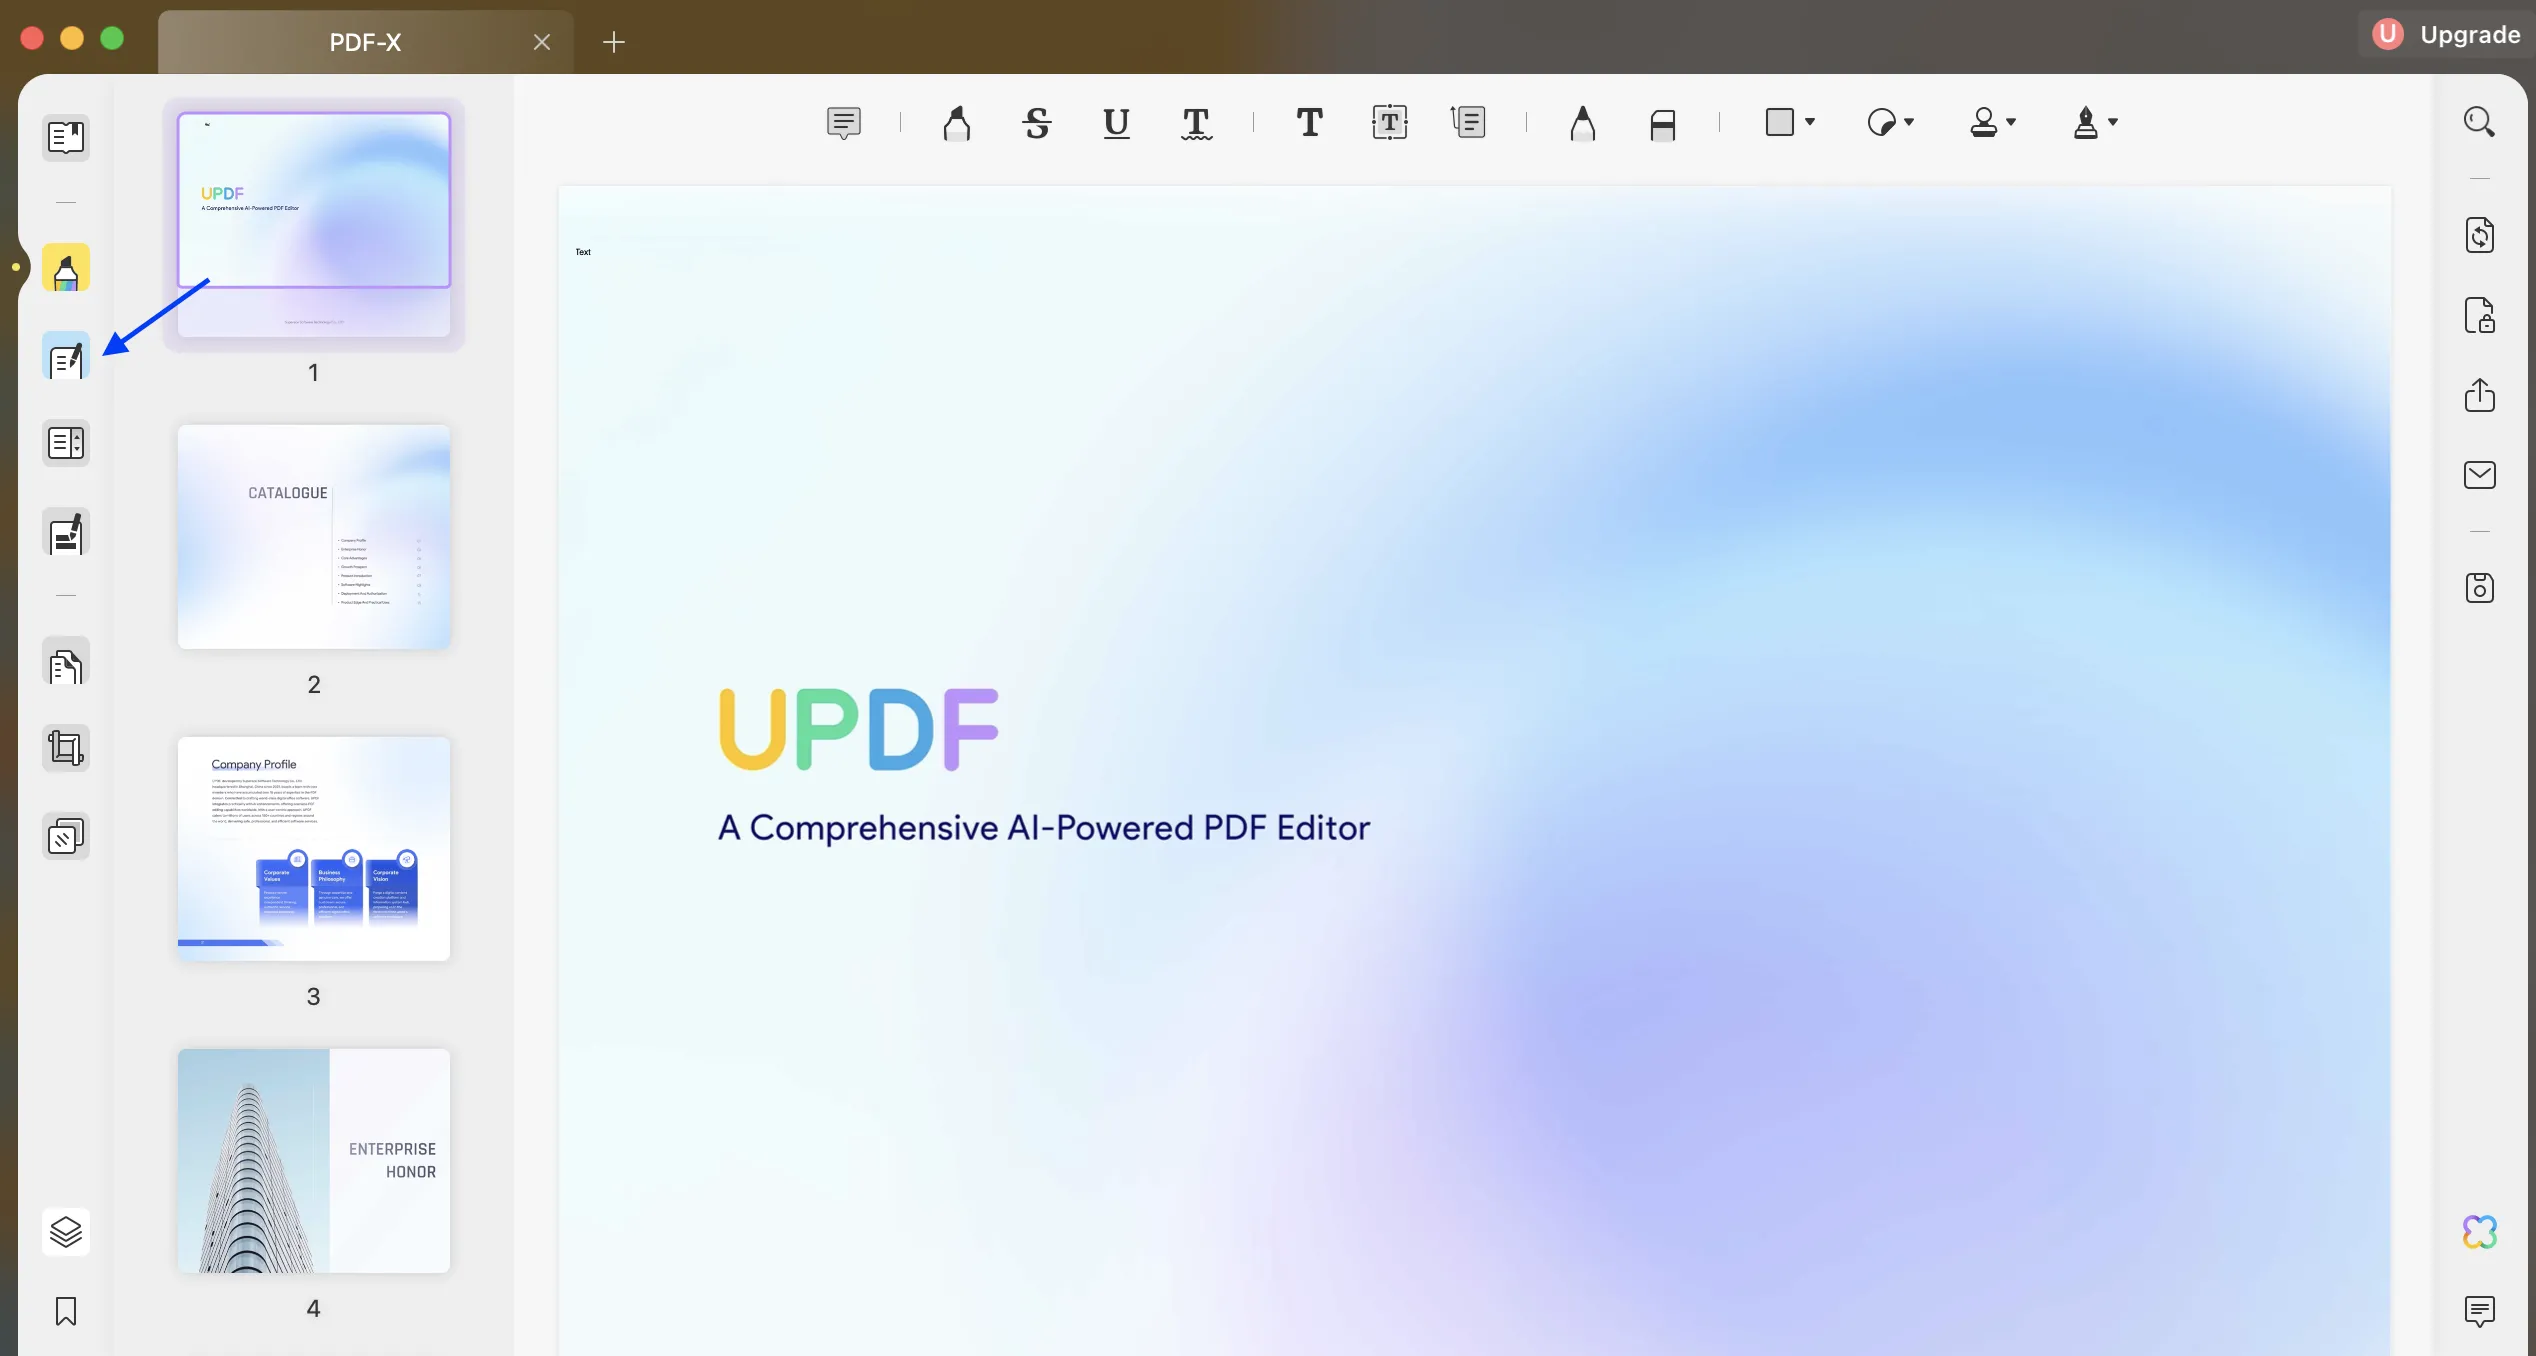 what is a pdf e edit PDF with UPDF